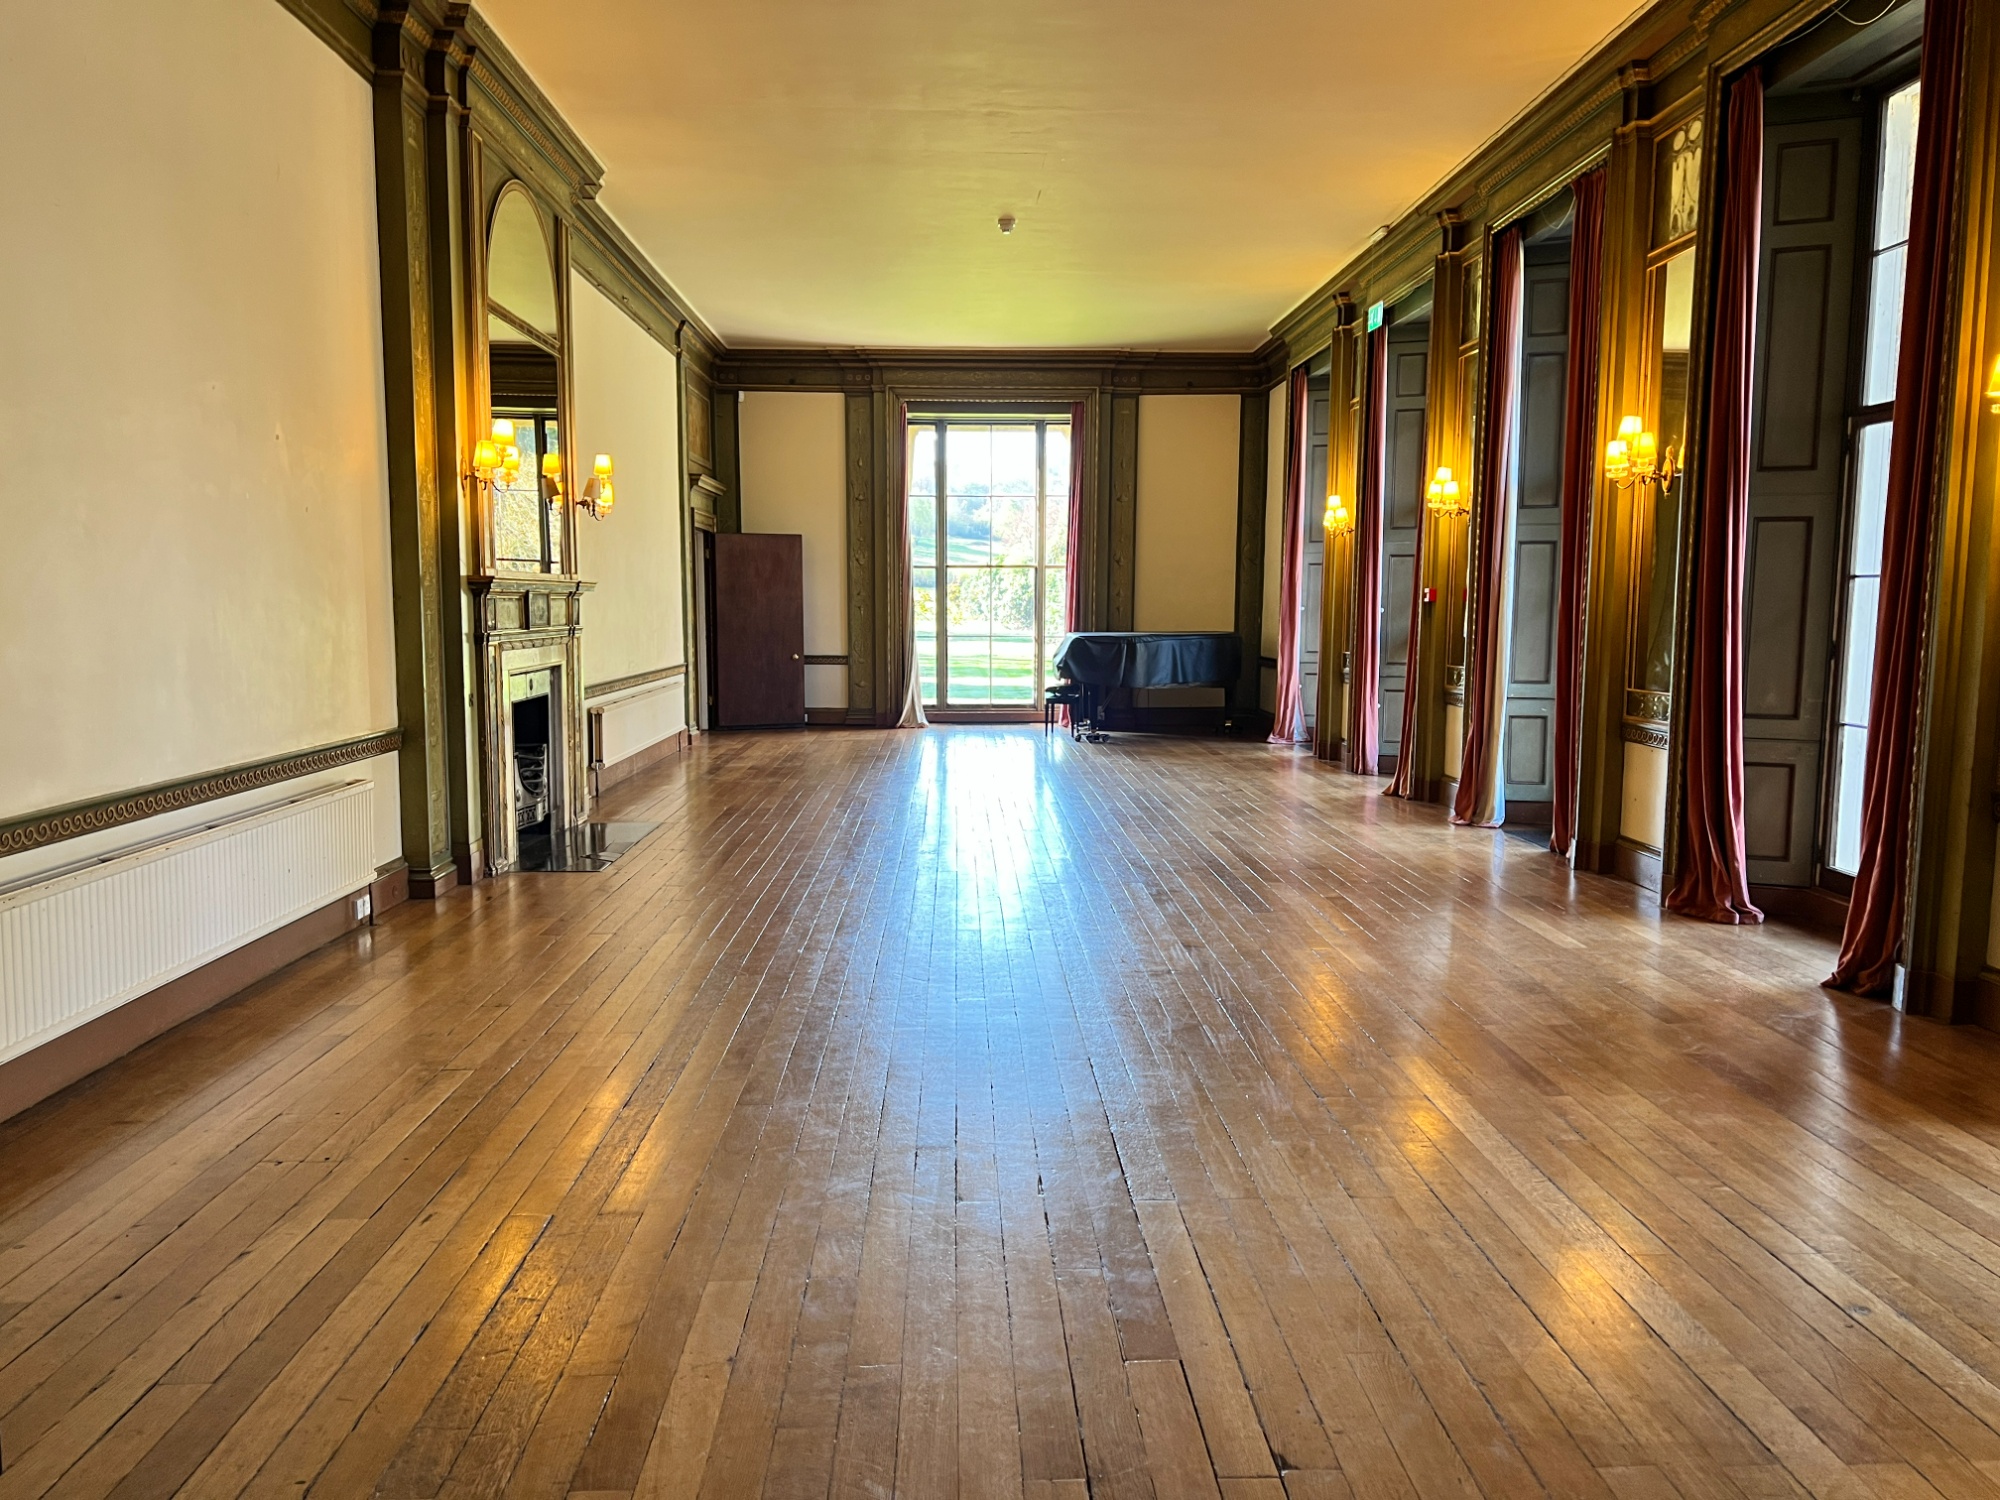 The Long Room letting space